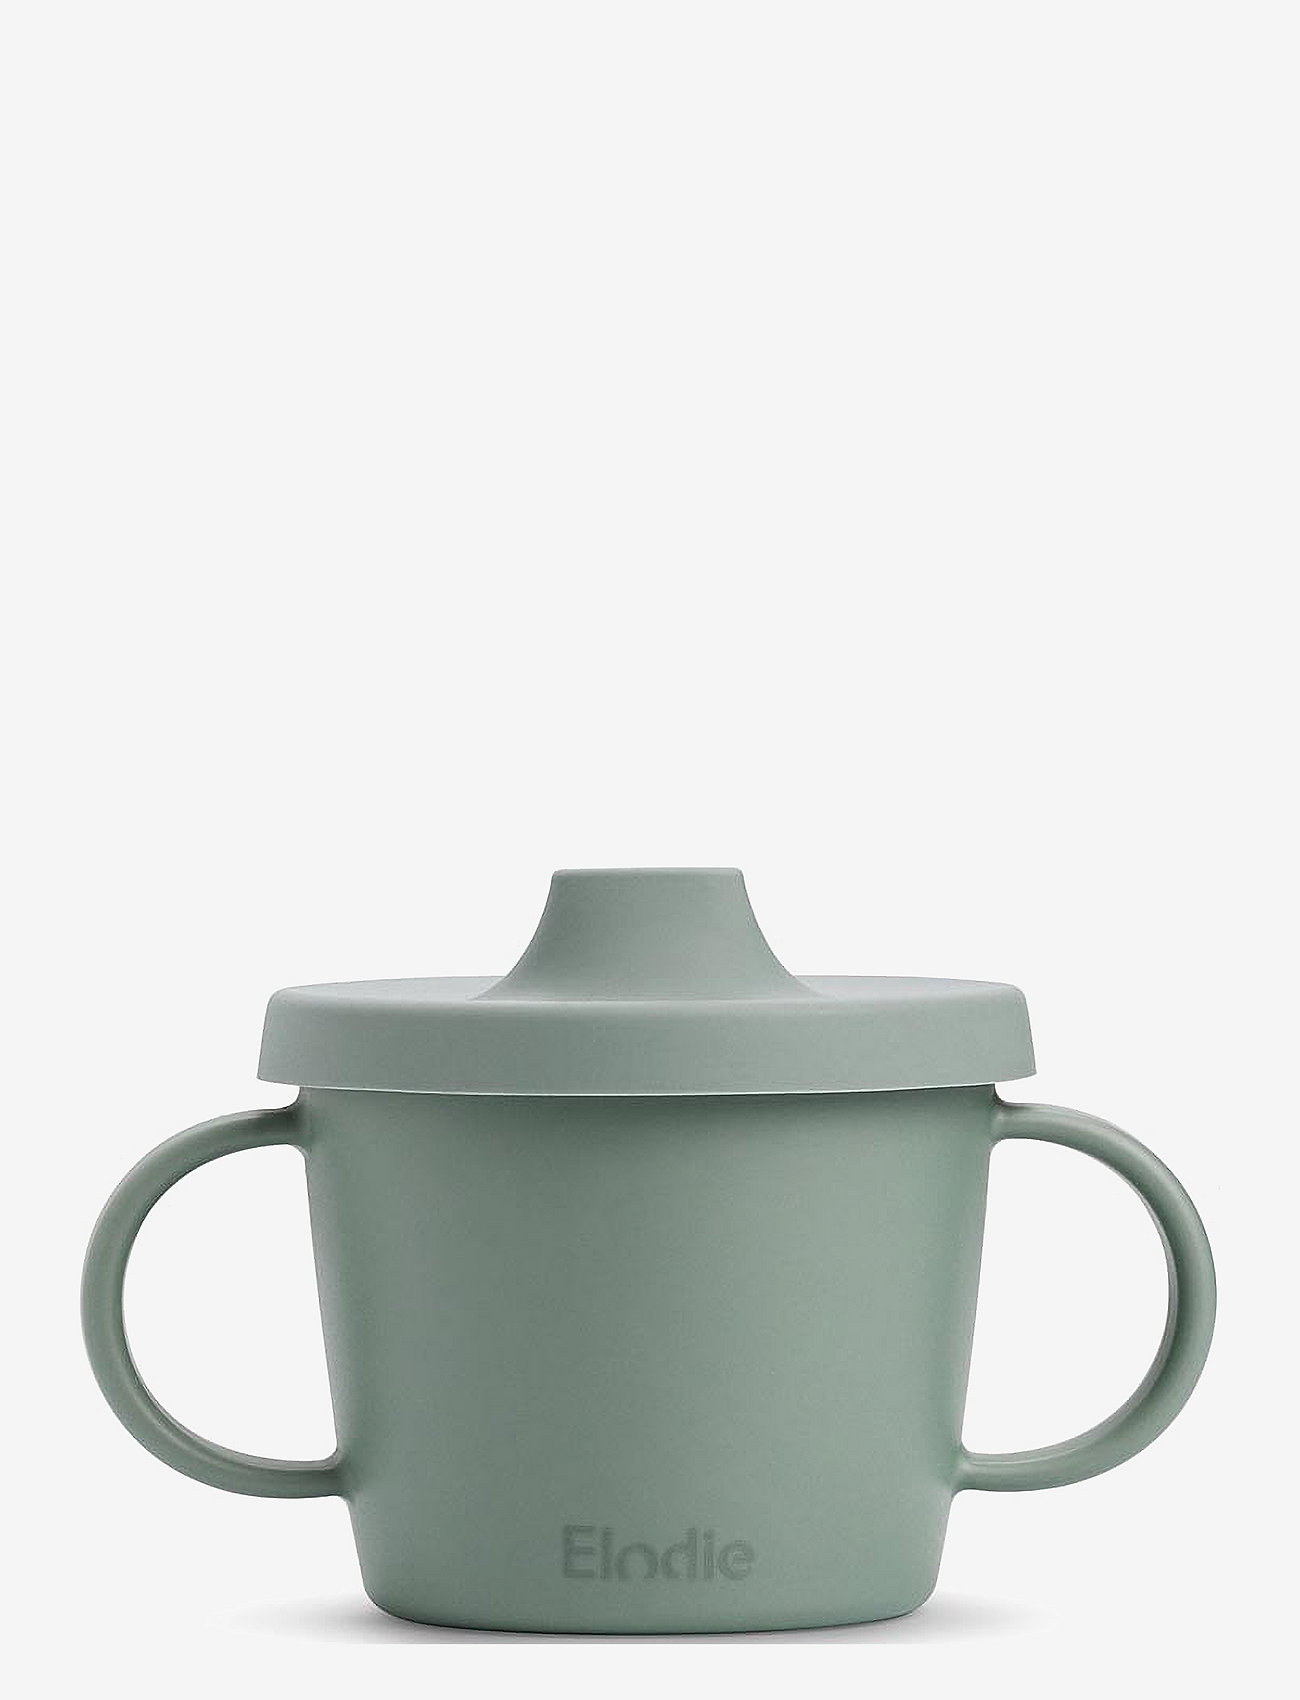 Elodie Details - Sippy Cup - Pebble Green - sippy cups - pebble green - 1